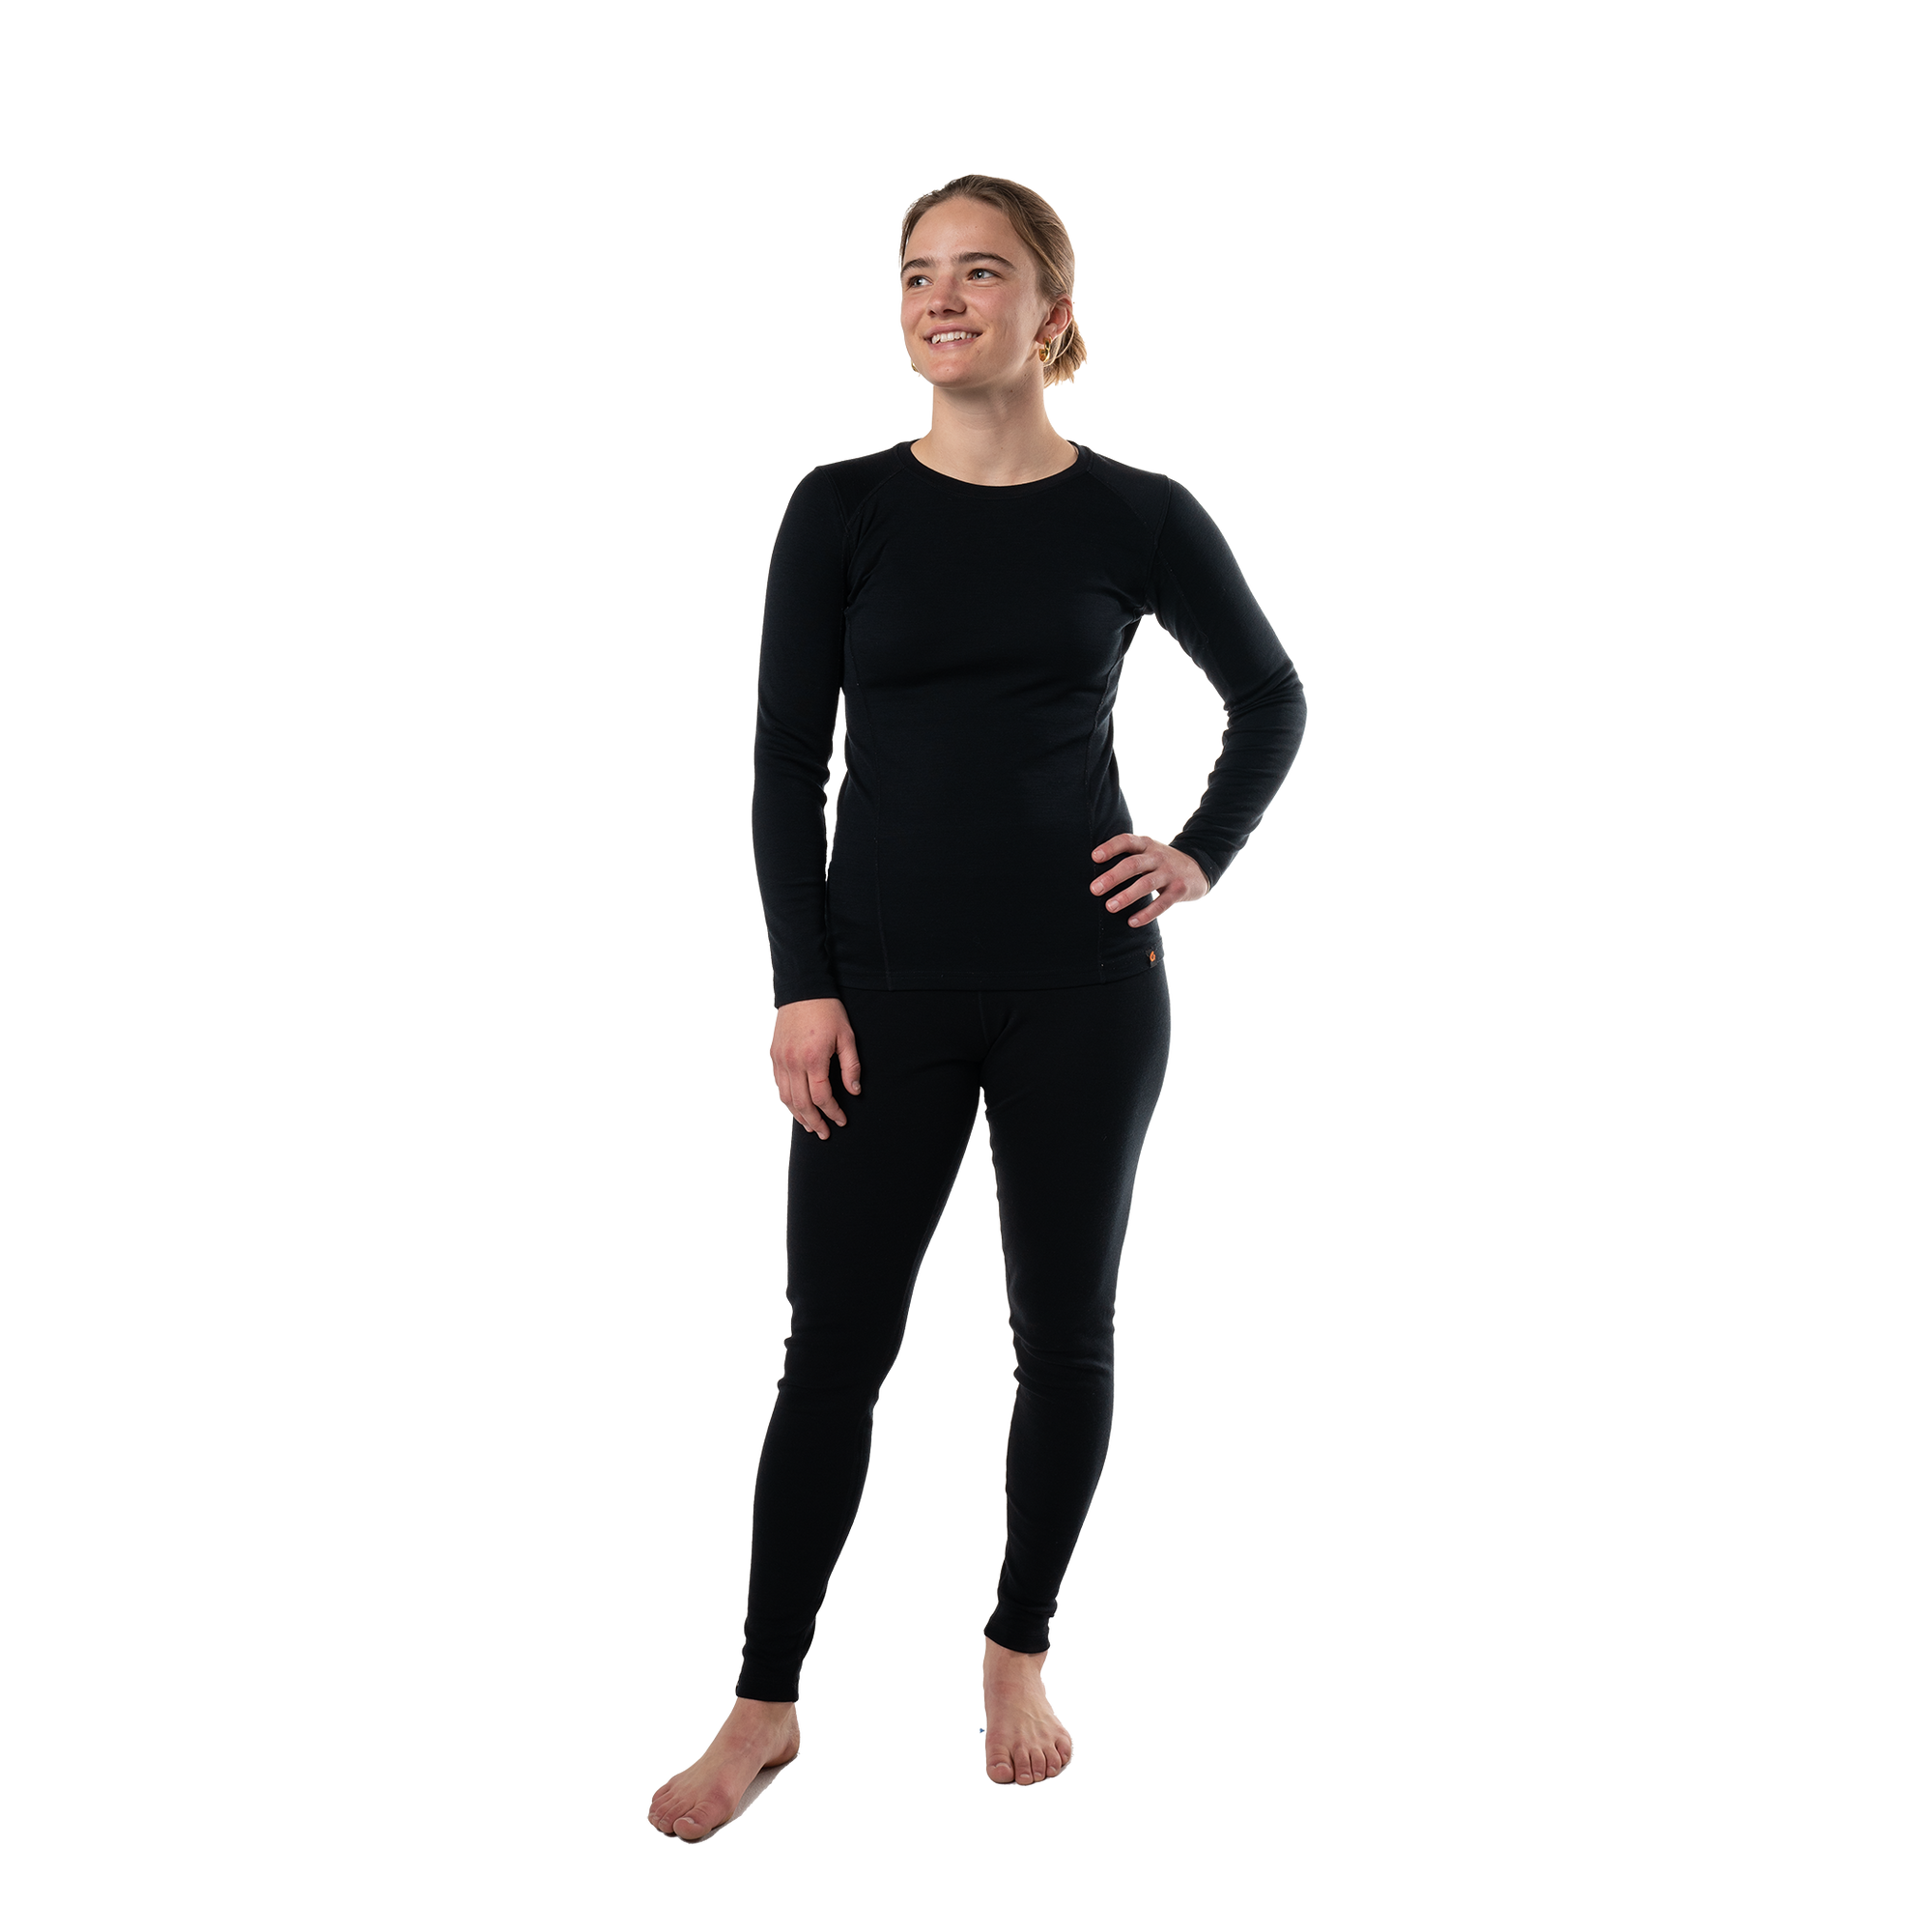 Women's Base Layer Long Sleeve Mid-Weight Crew Neck Top - Point6